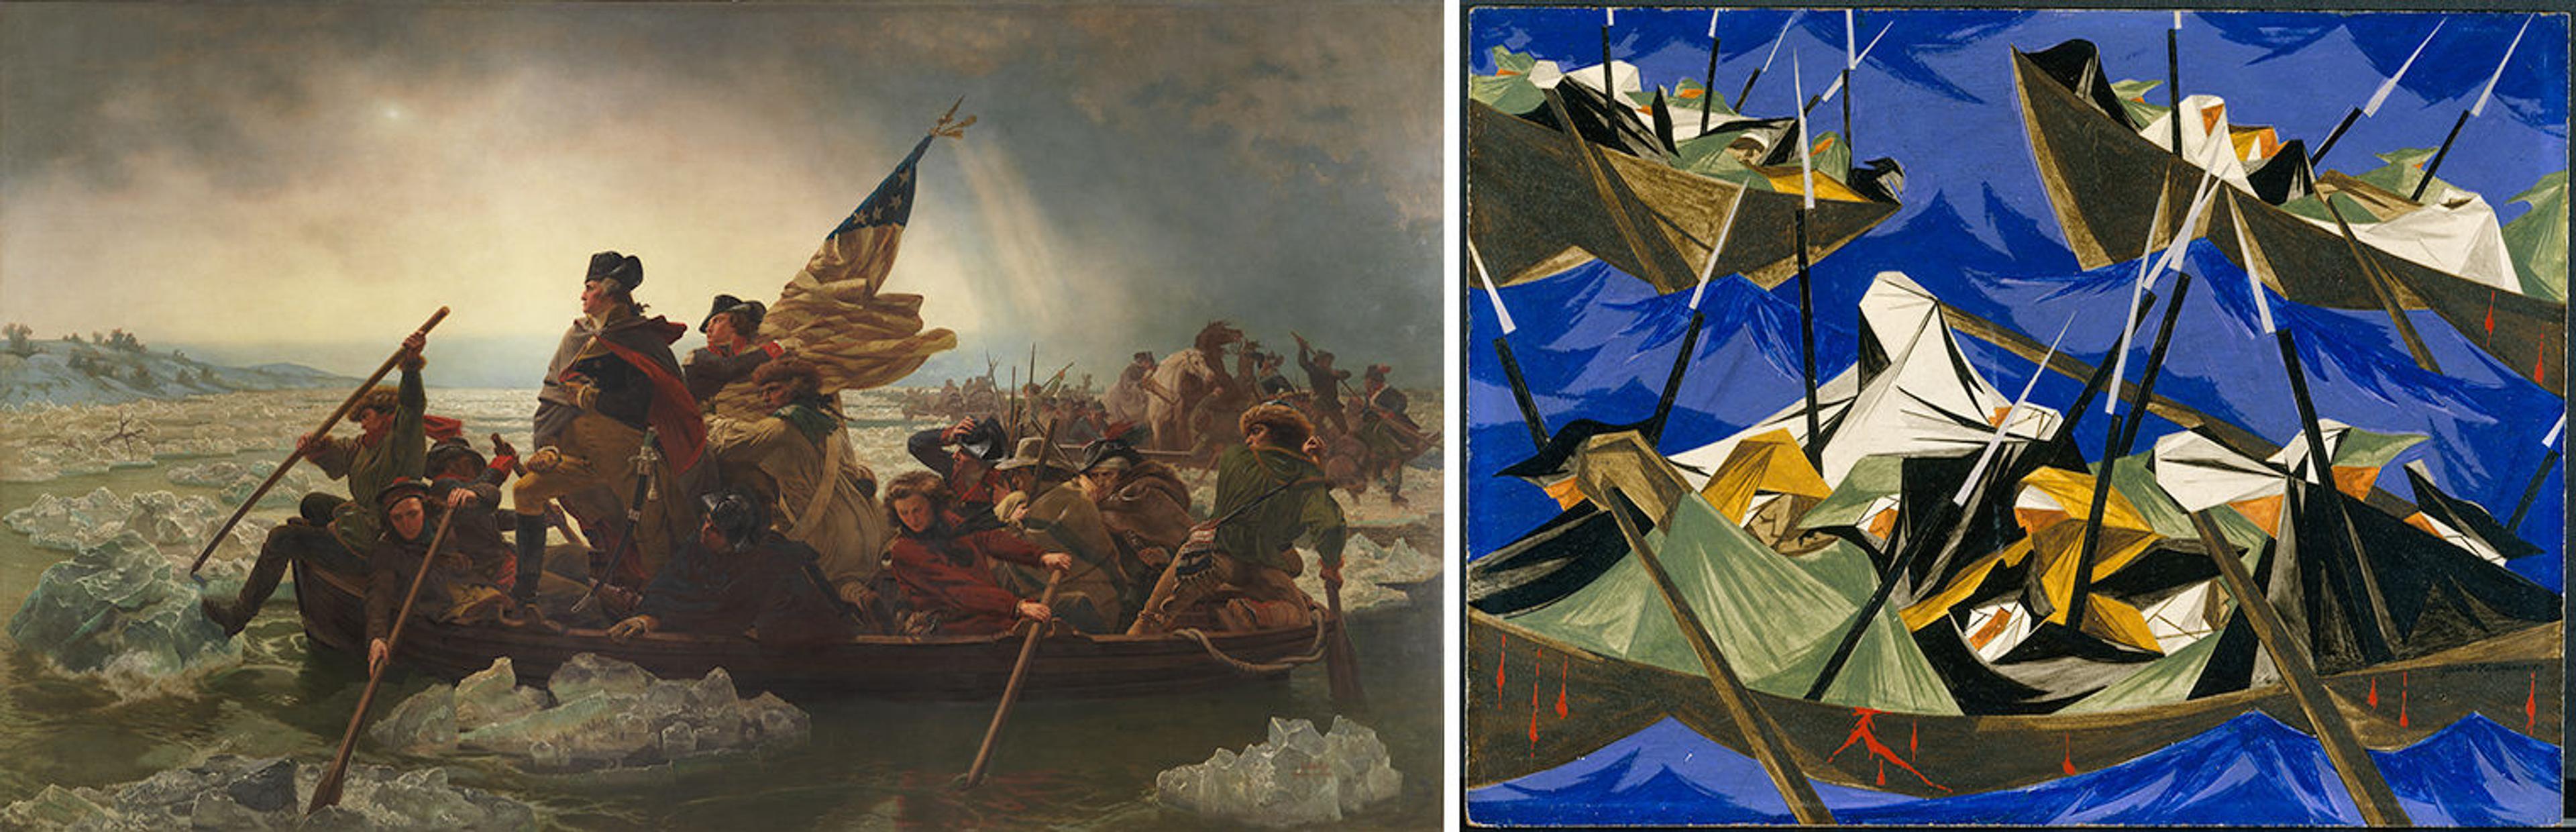 A side-by-side comparison of a painting by Emanuel Leutze (left) and one by Jacob Lawrence (right), both which depict event surrounding George Washington's troops crossing the Delaware river during the American Revolution.